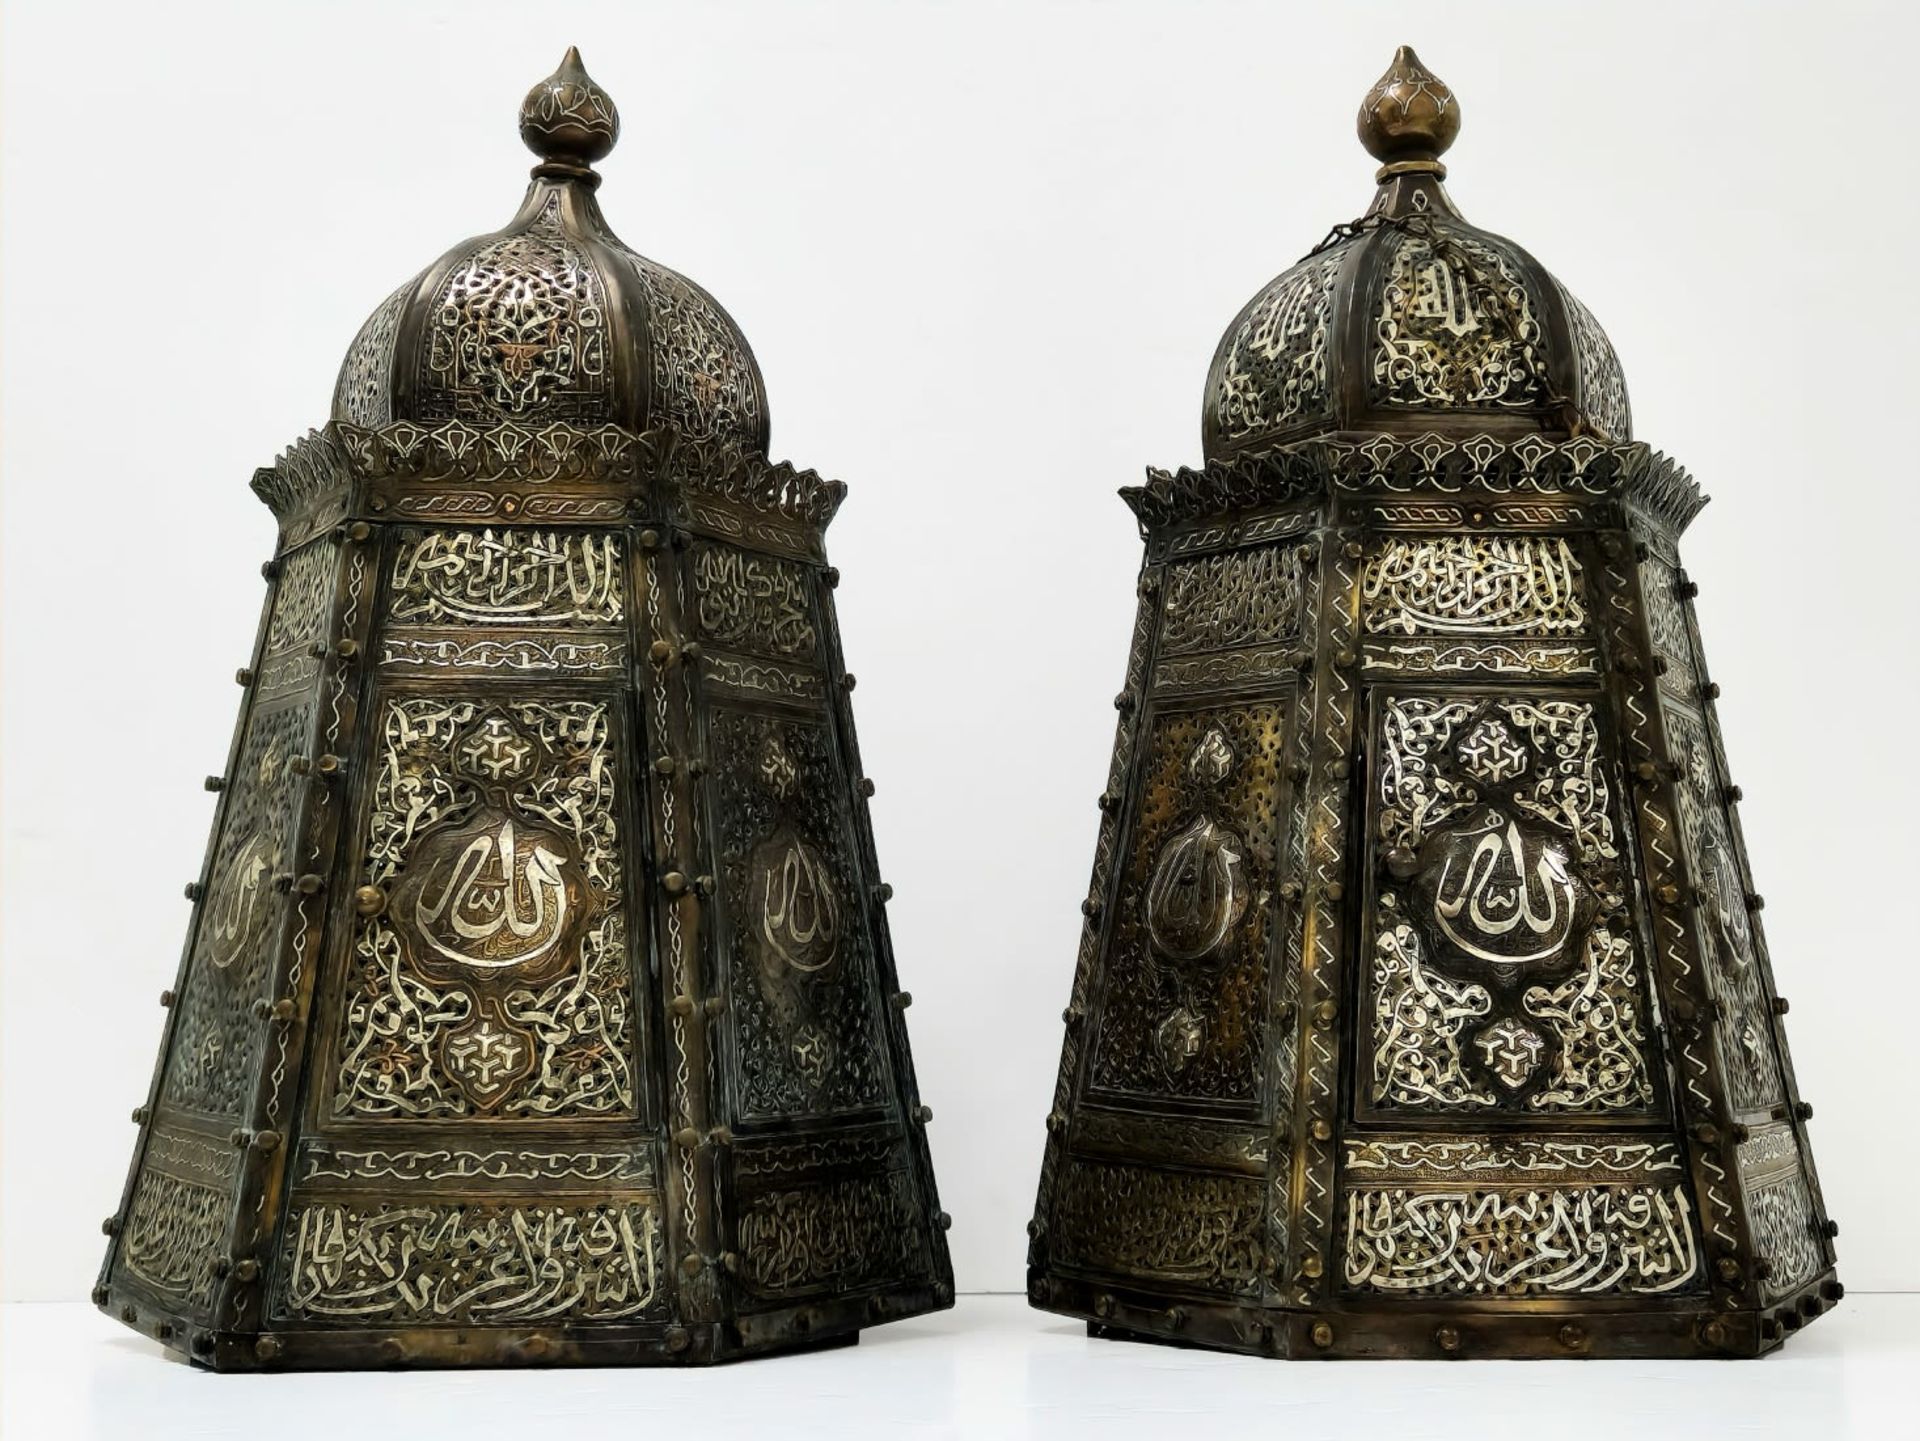 A pair of Islamic mosque lamps, impressive and high-quality lamps, made in Damascene Work, (inlay of